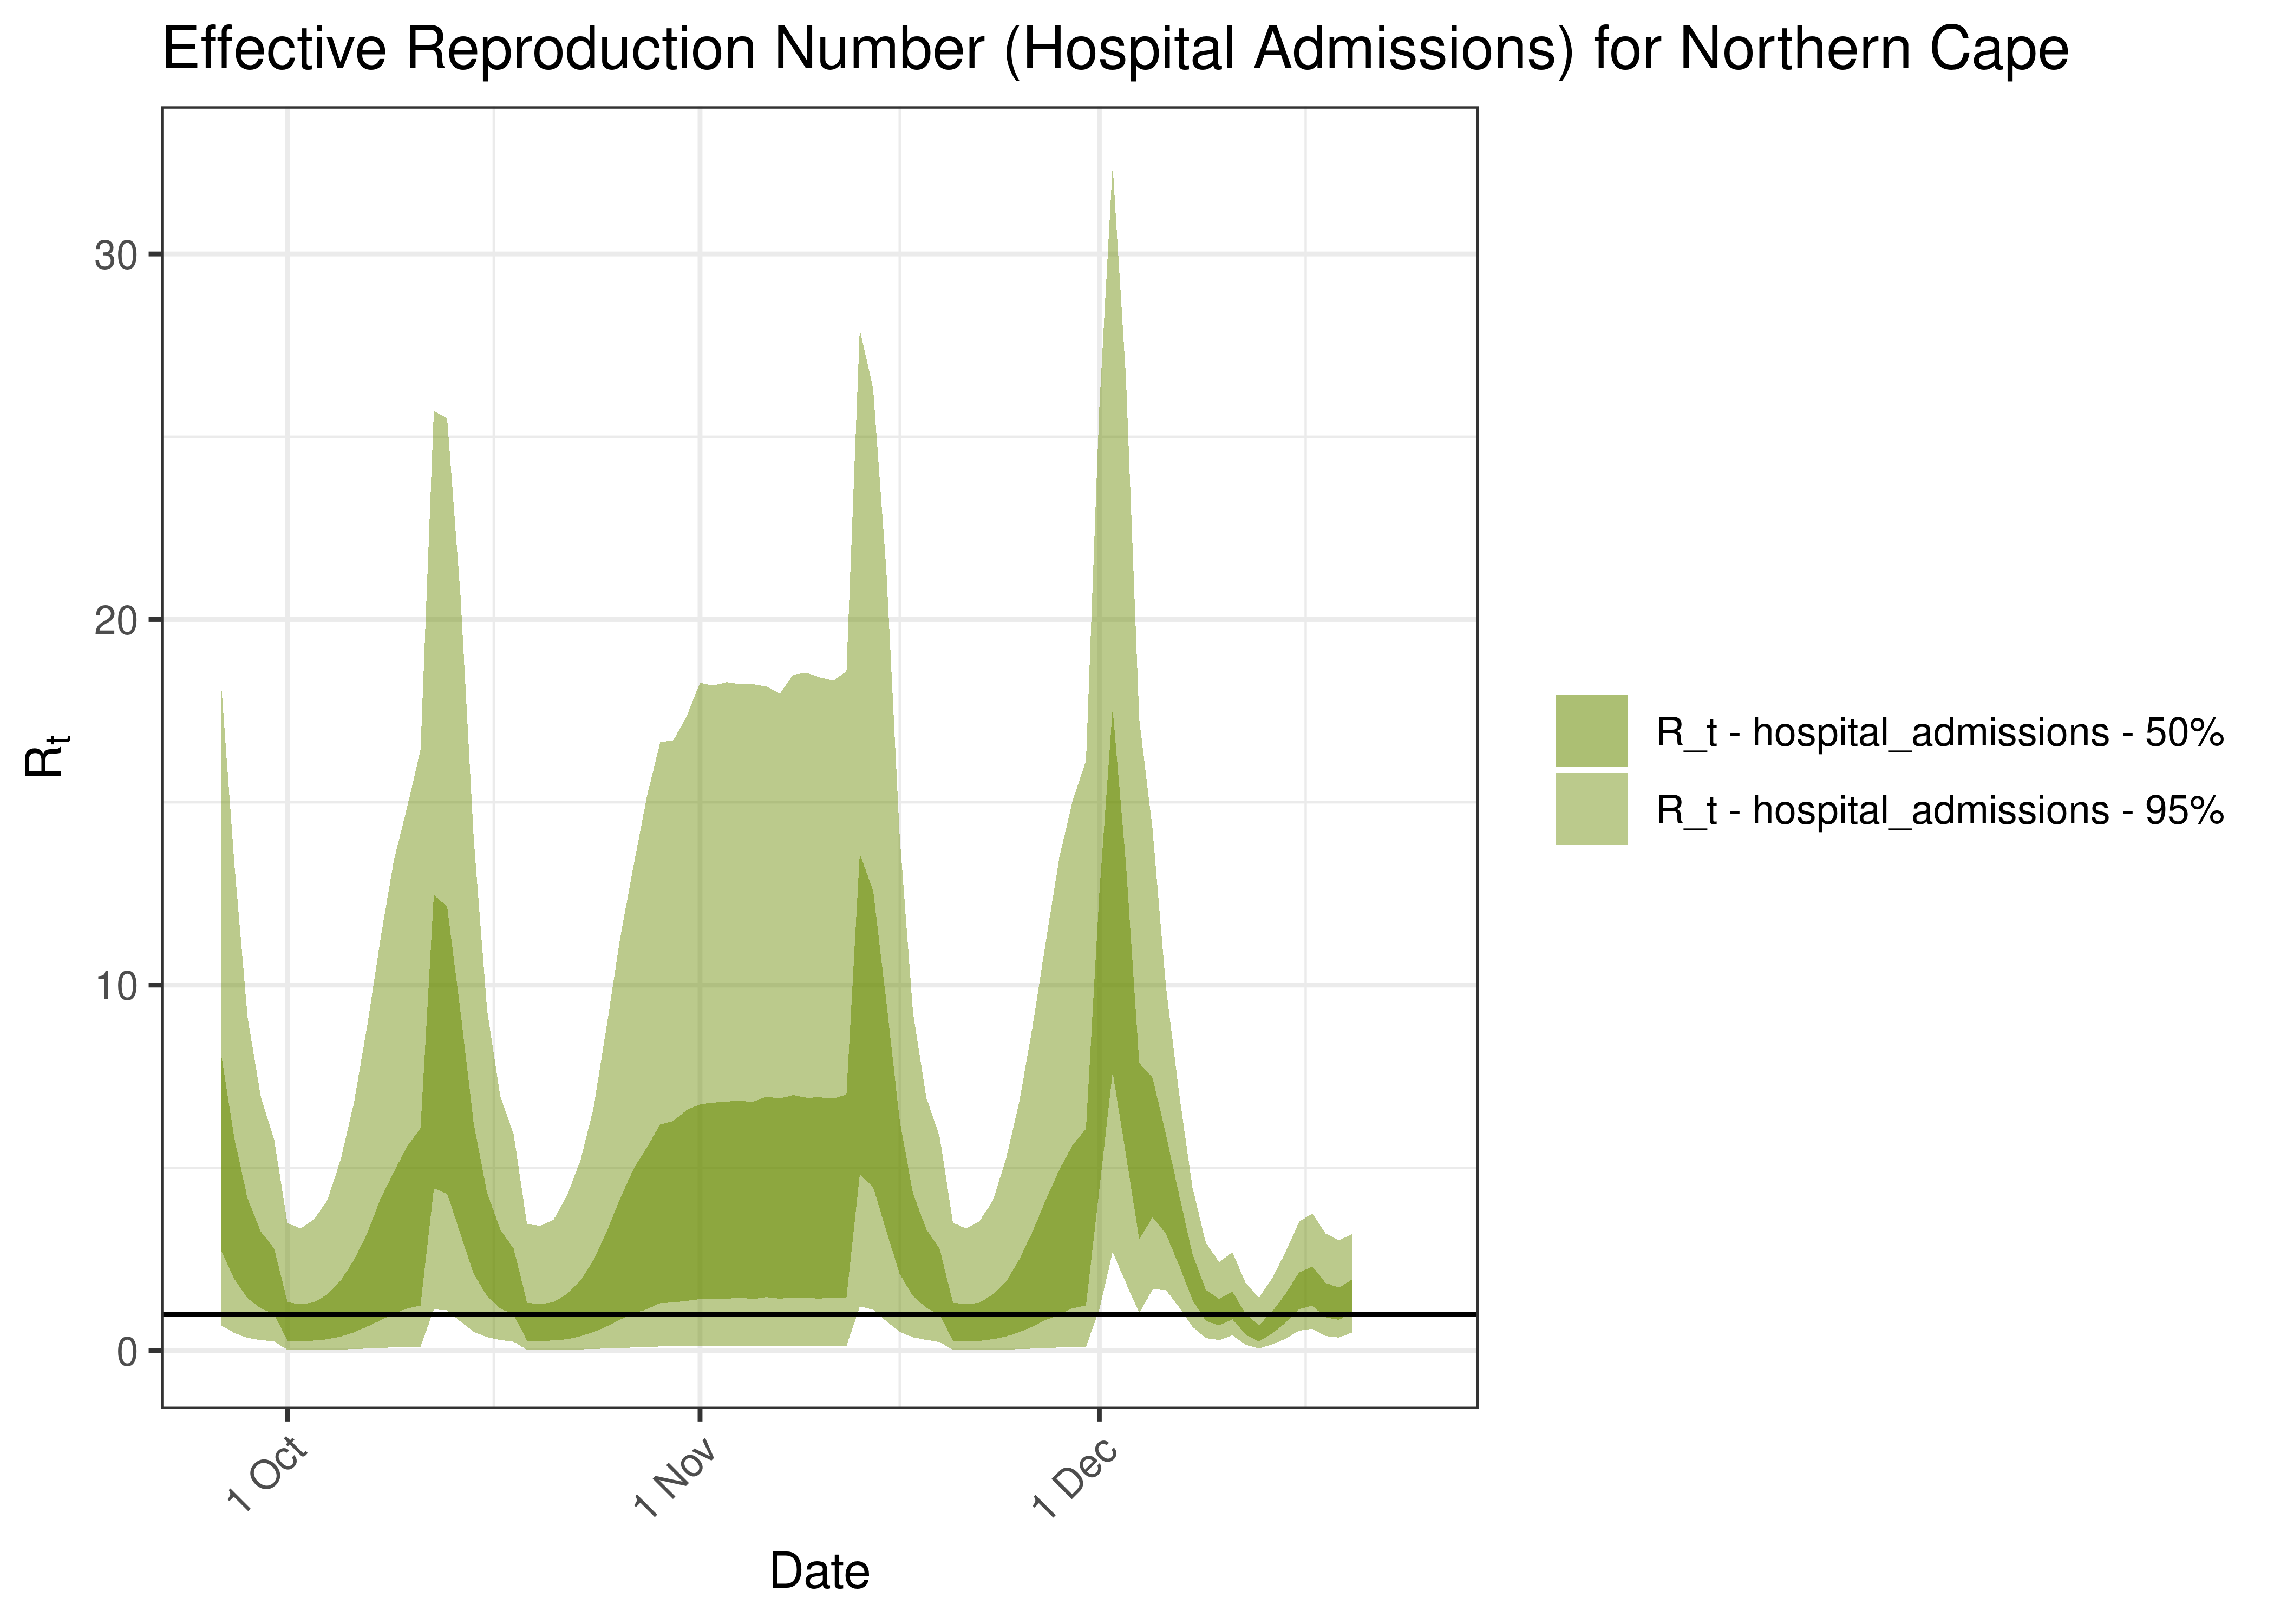 Estimated Effective Reproduction Number Based on Hospital Admissions for Northern Cape over last 90 days